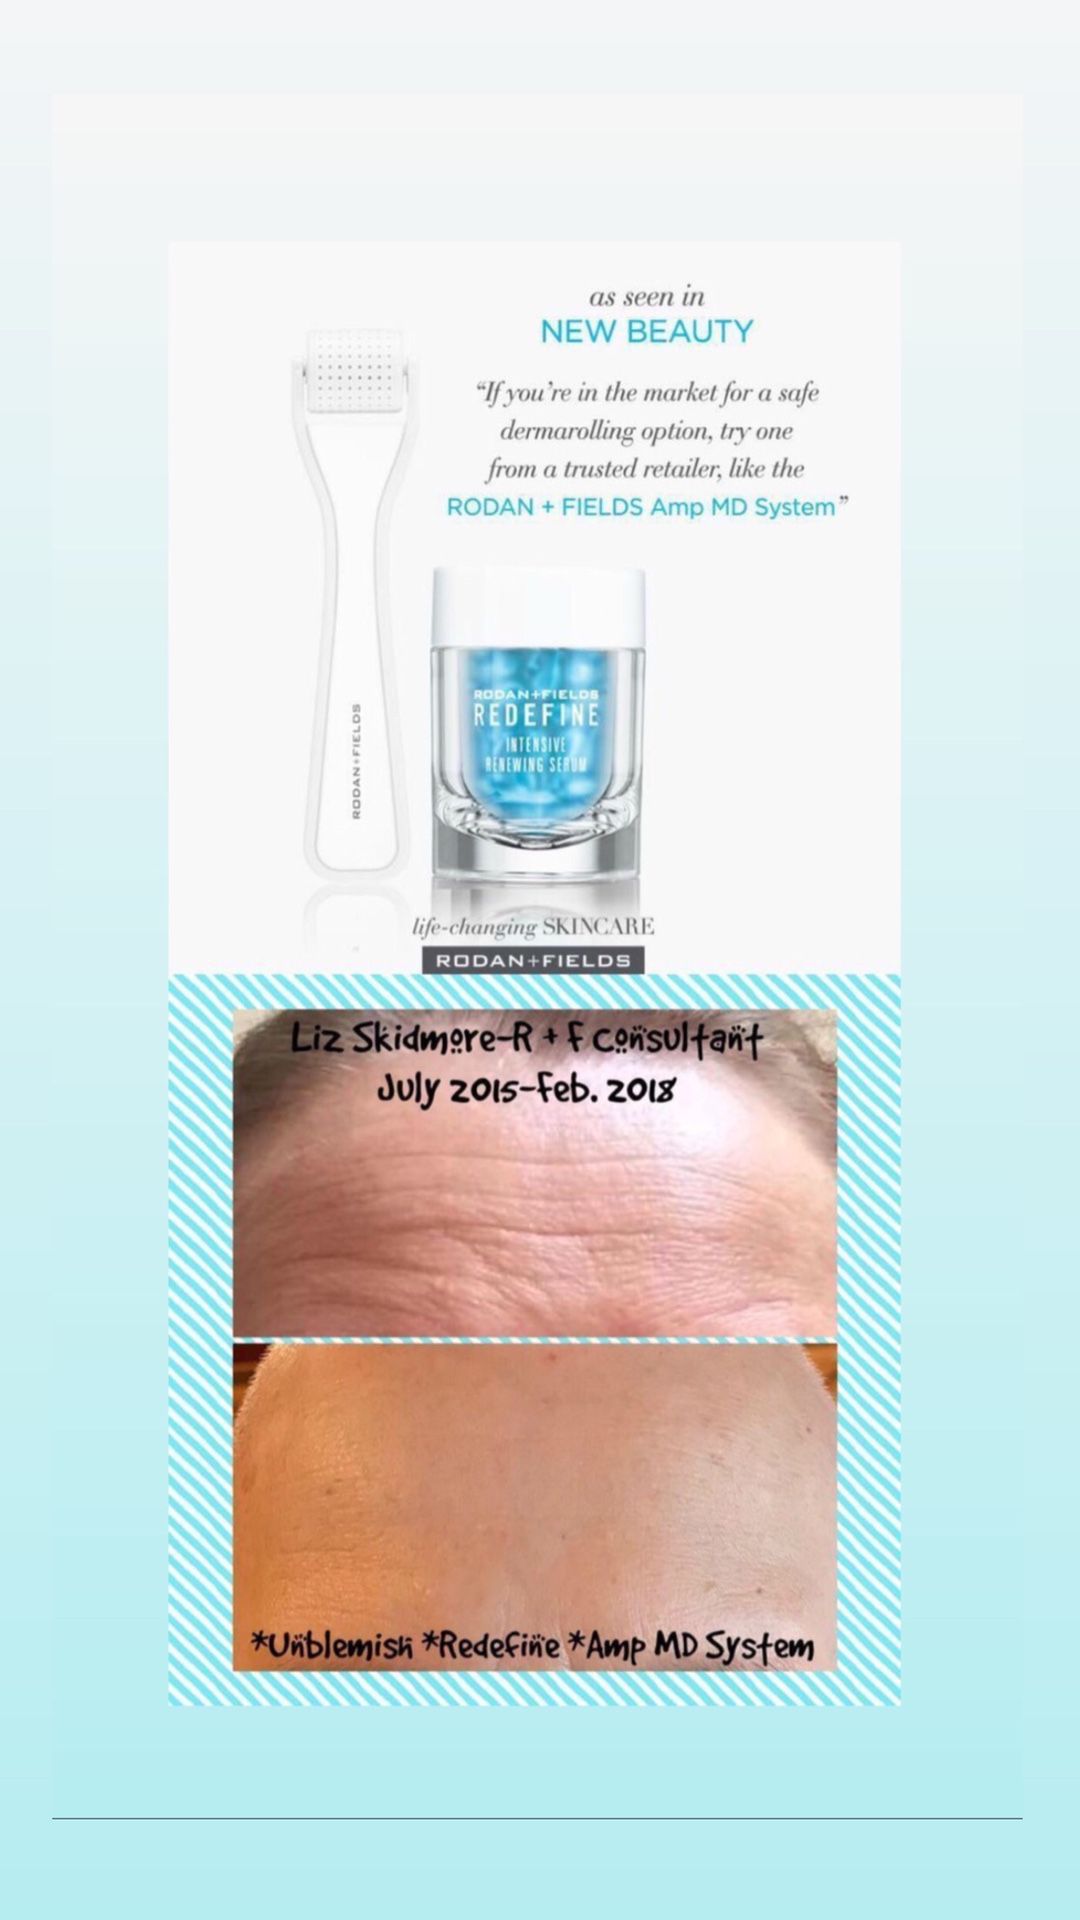 Amp md system Rodan and fields